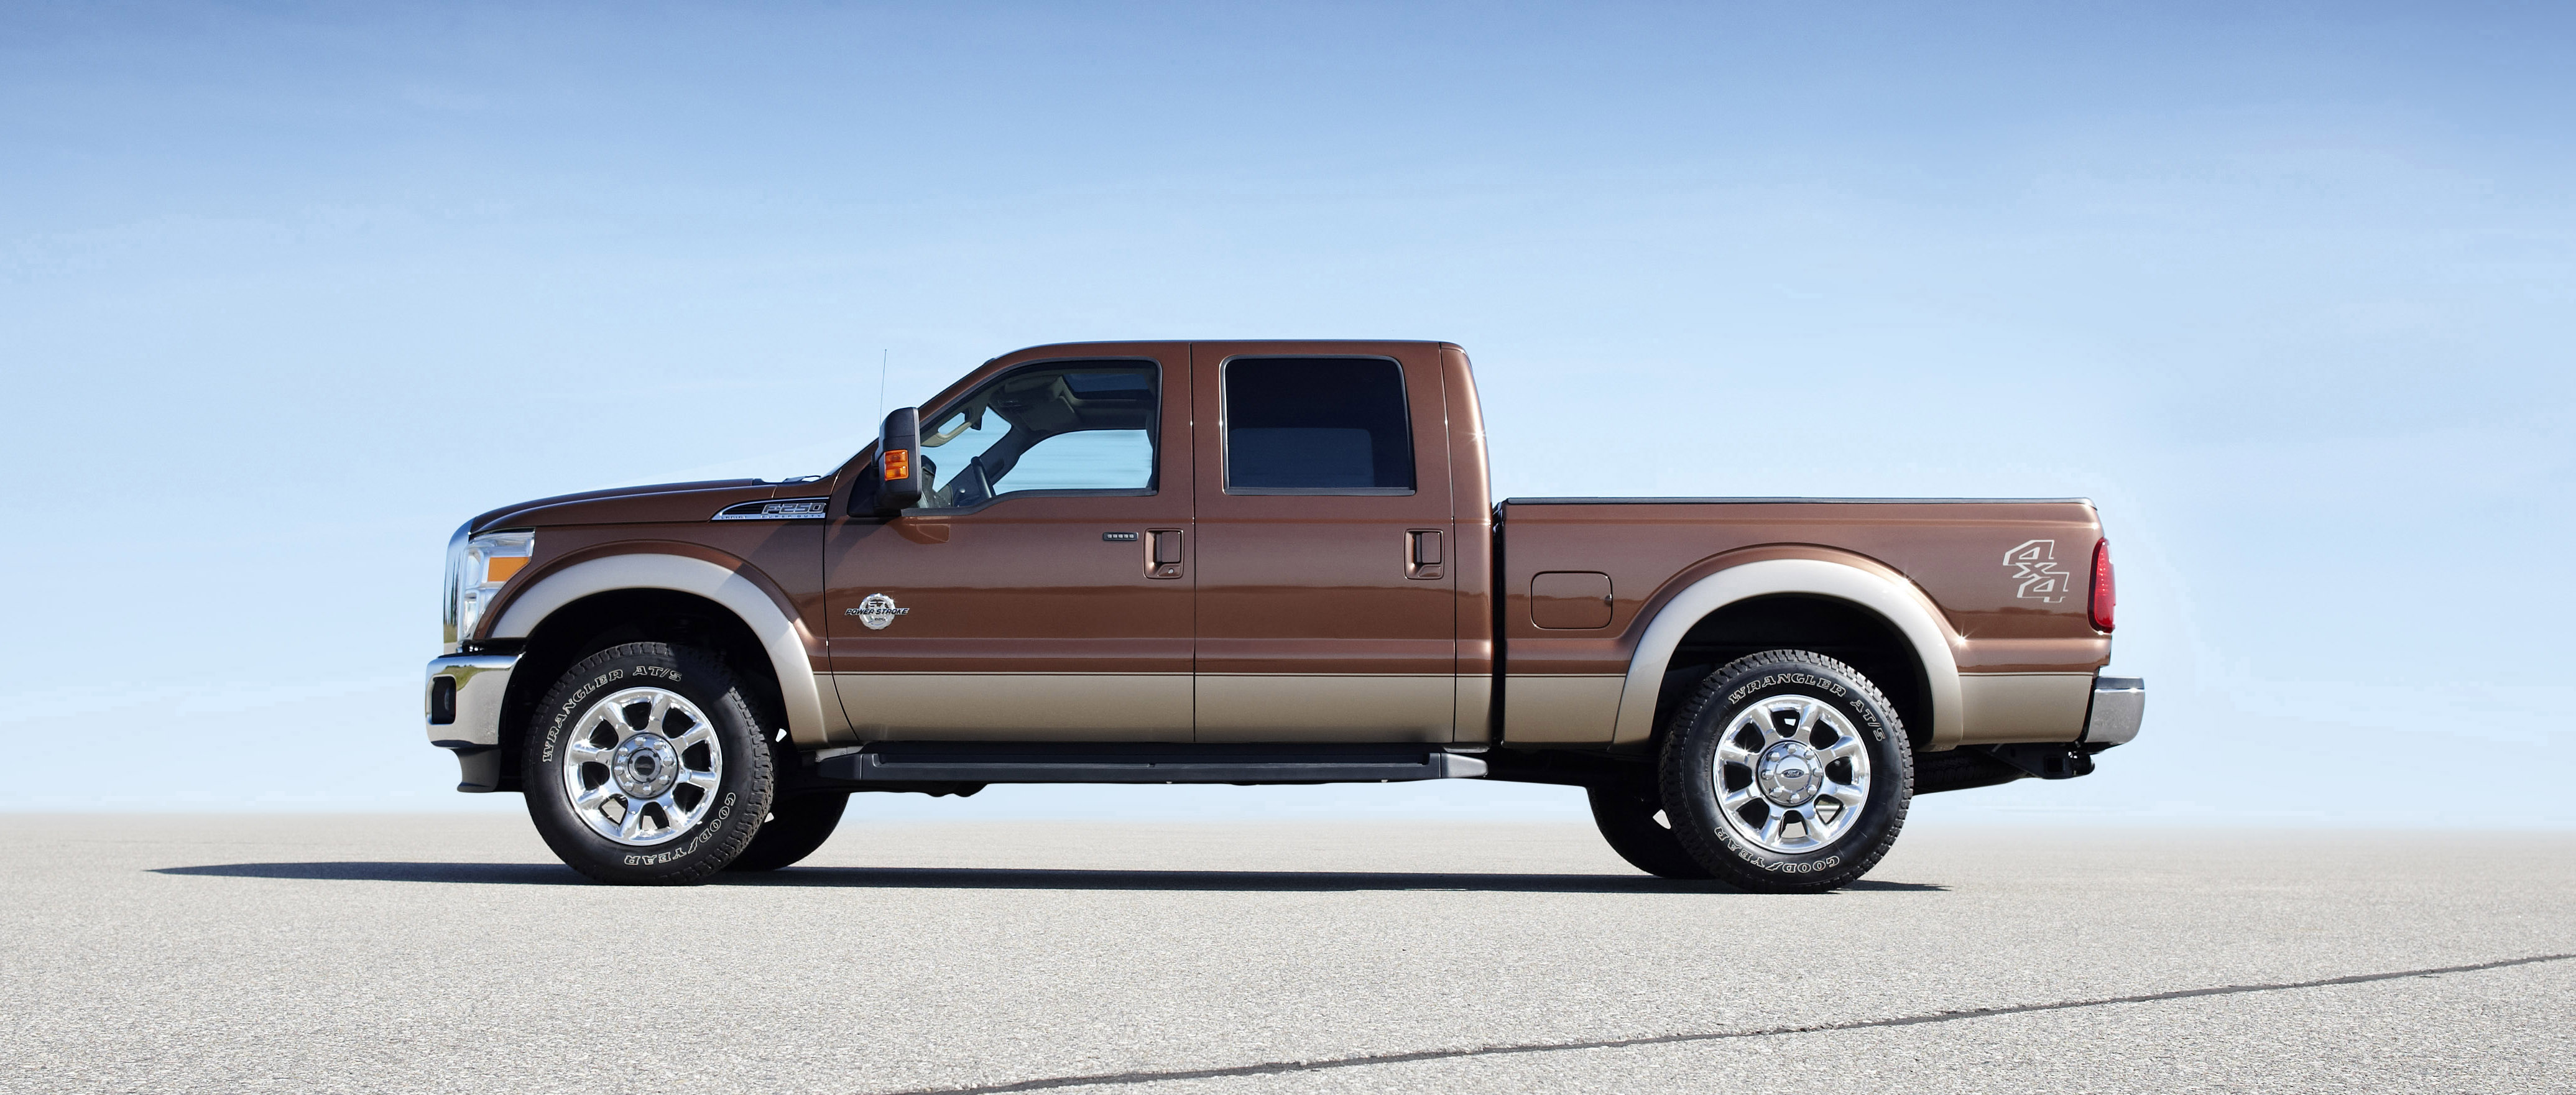 Nice Images Collection: Ford F-250 Lariat Desktop Wallpapers